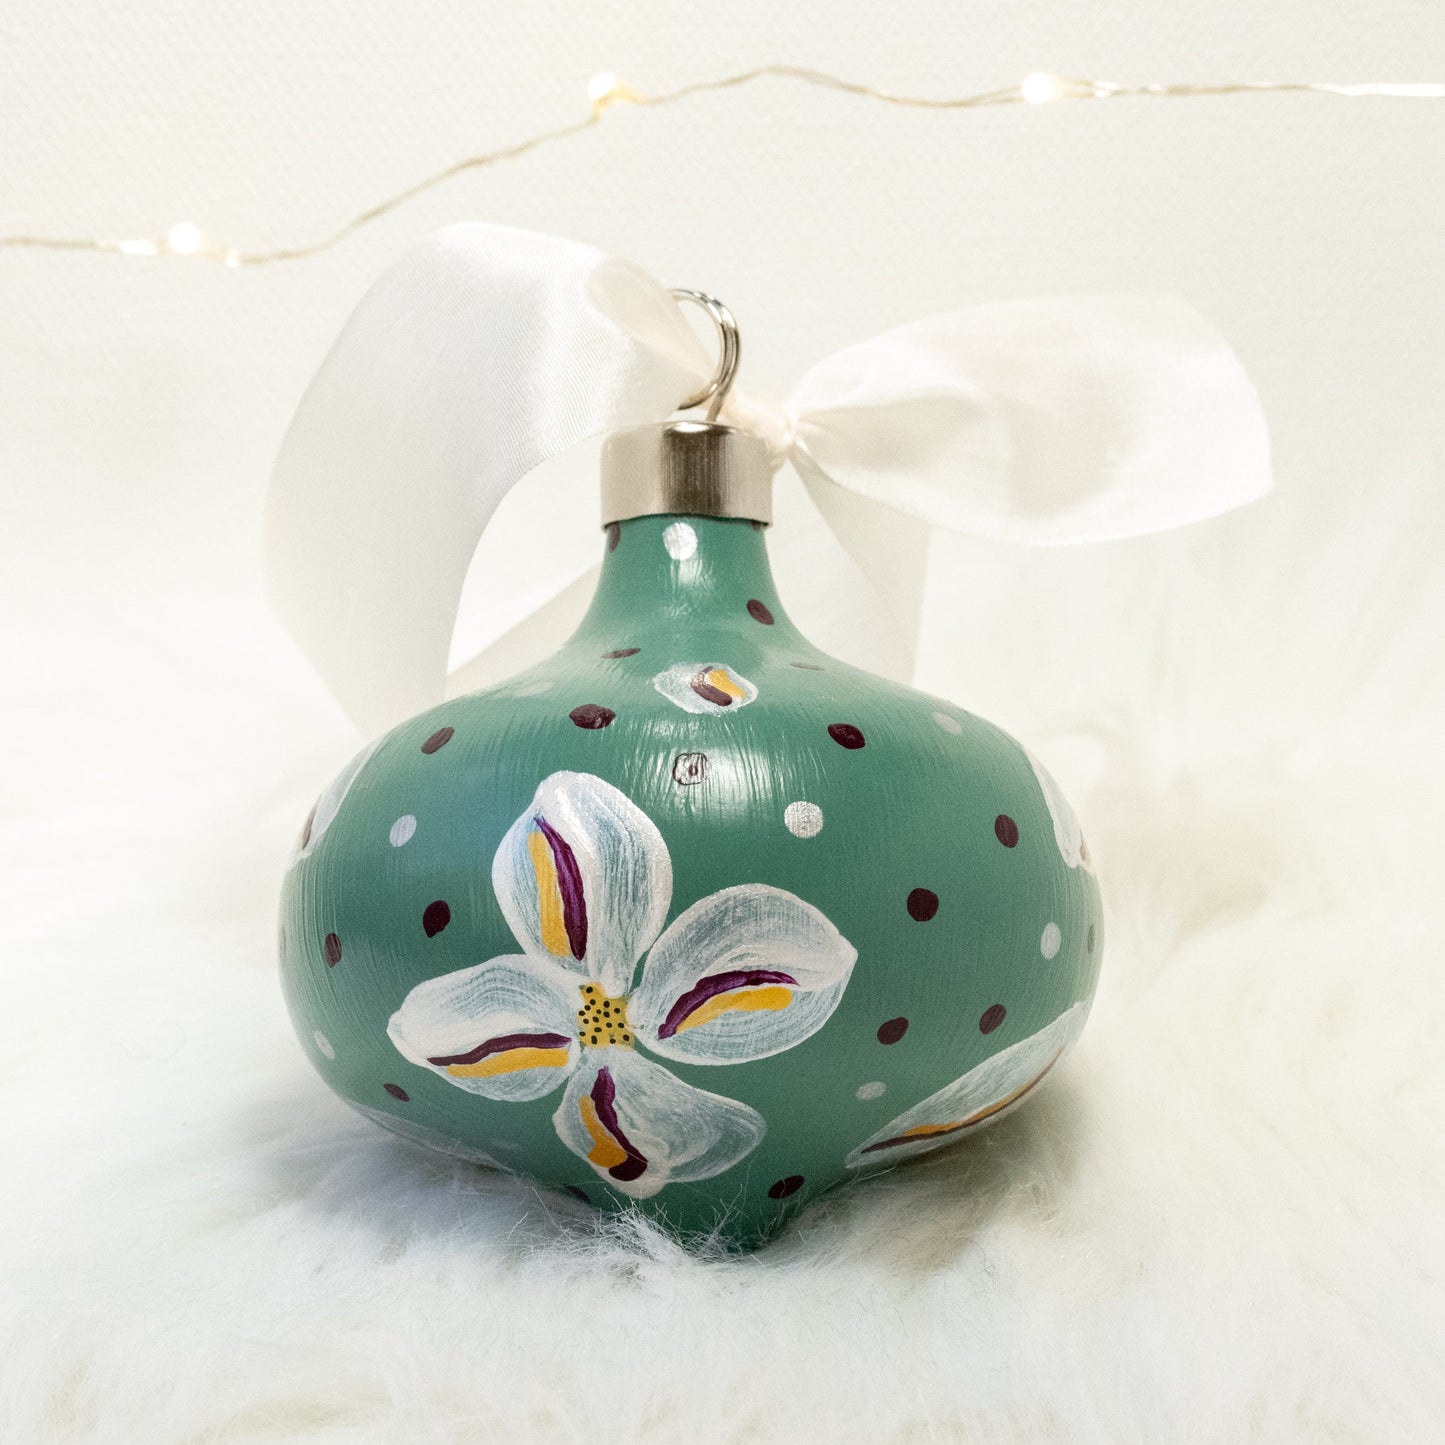 The Kristina Hand Painted Ornament features a sage green base coat, metallic white flowers with deep magenta and gold accent details. Painted using acryla gouache paints. Displayed on white faux fur with fairy lights in the background.